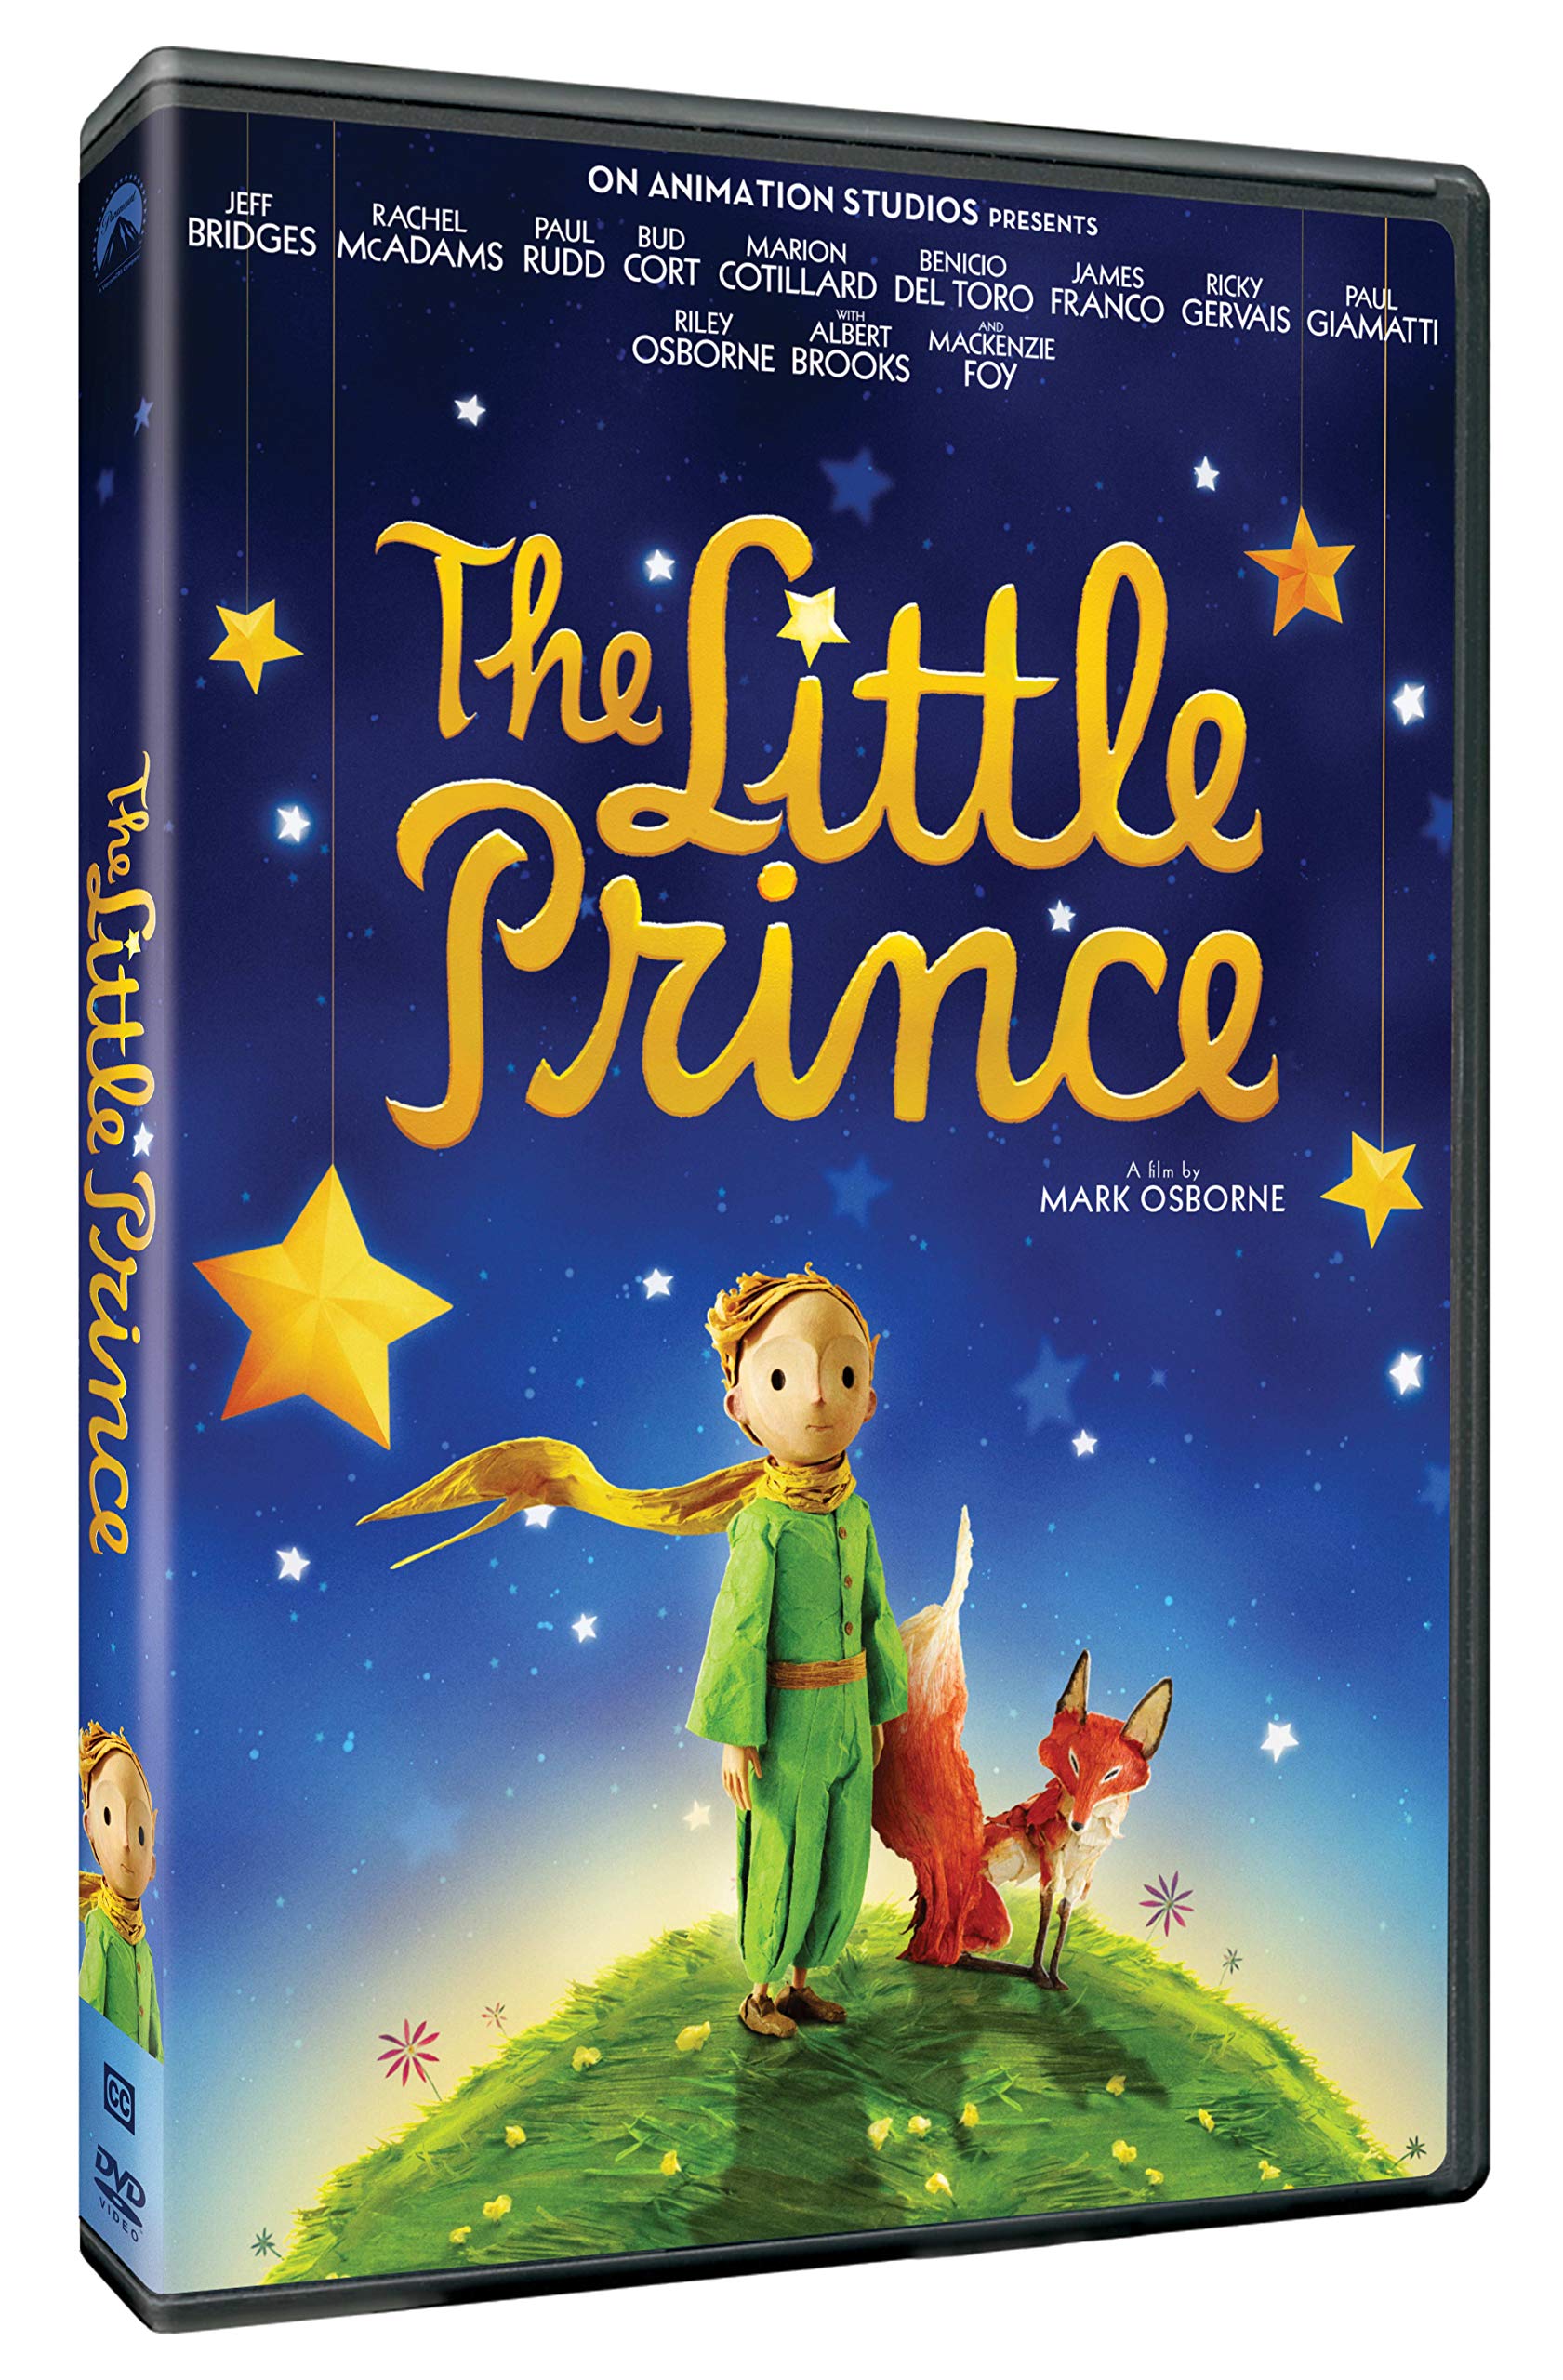 The Little Prince : The New Mission DVD Review & Giveaway